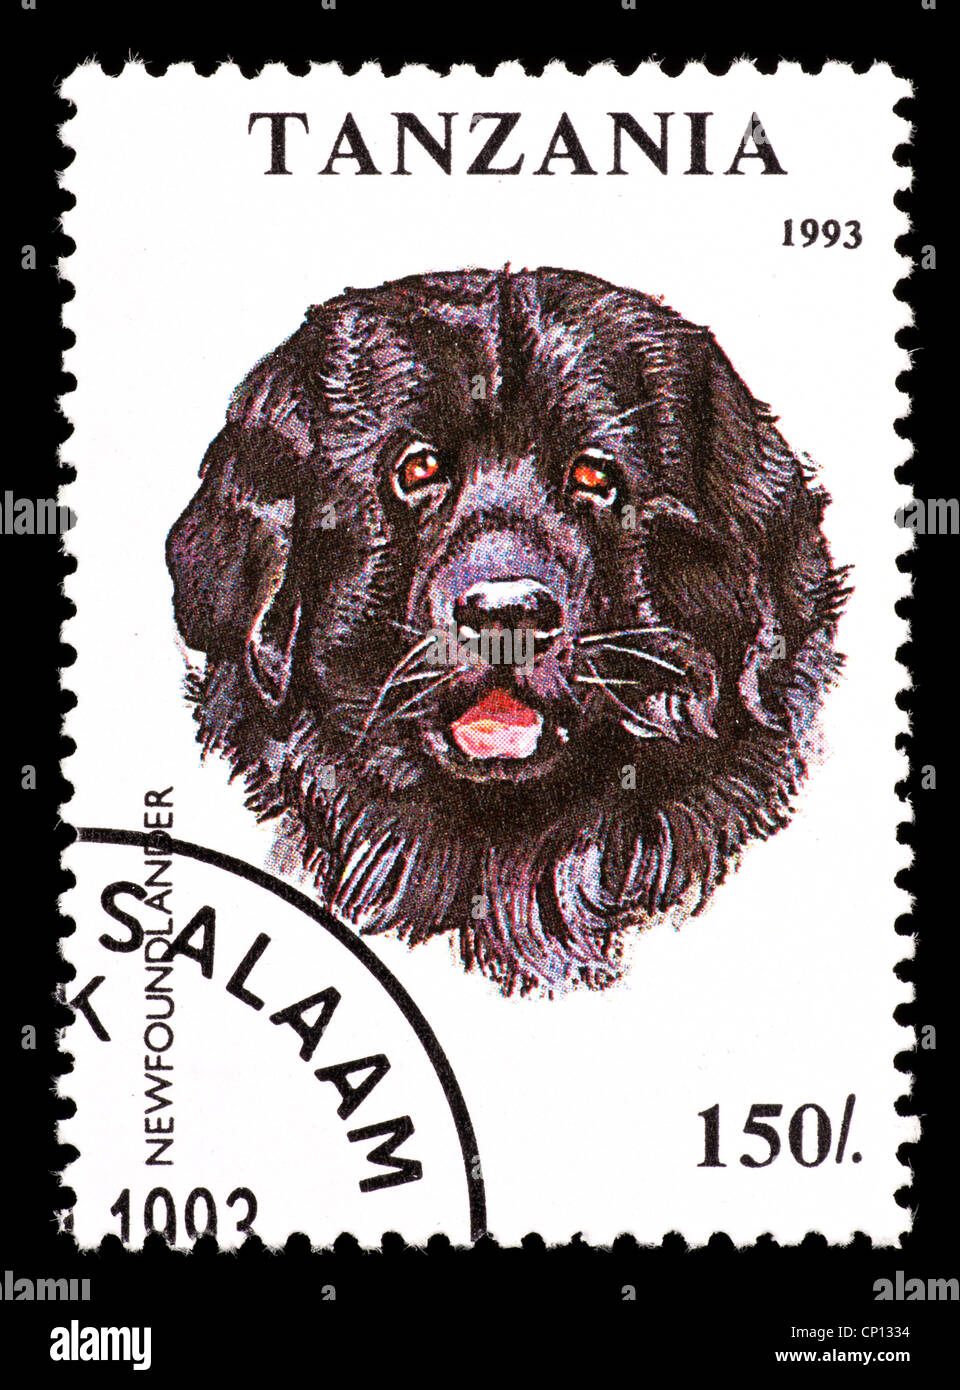 Postage stamp from Tanzania depicting a Newfoundlander dog Stock Photo